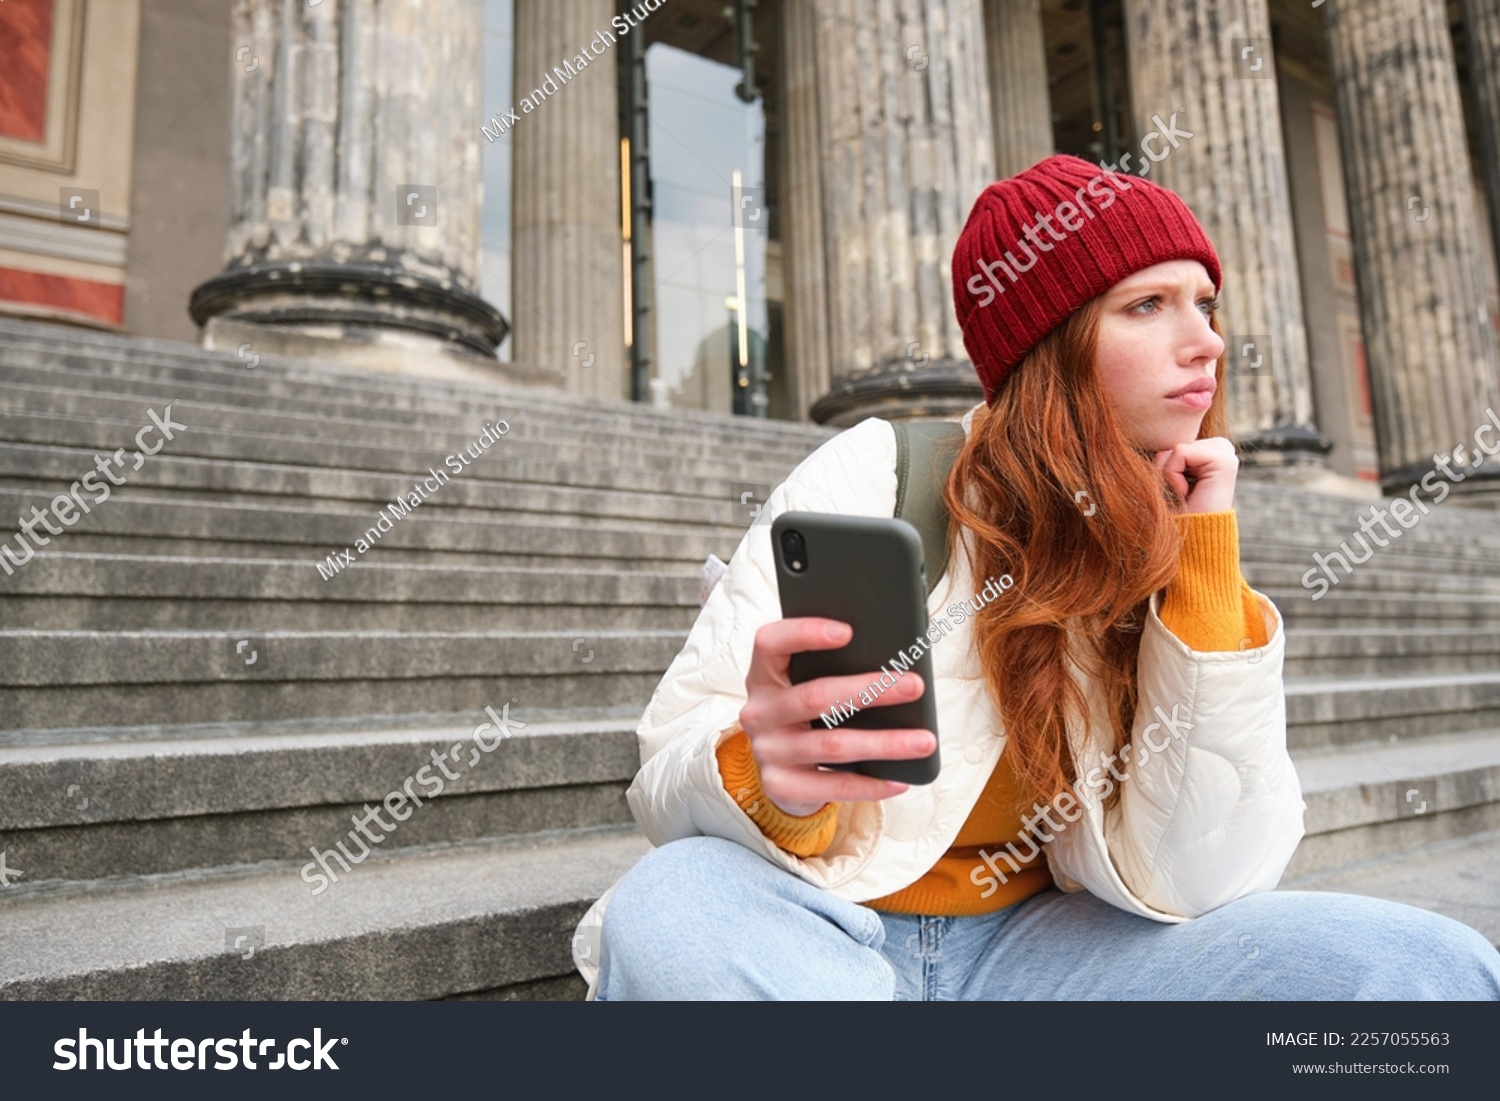 Portrait of young redhead woman with complicated face, sits on street stairs in red hat, holds smartphone and frowns thoughtful, feels uneasy. #2257055563